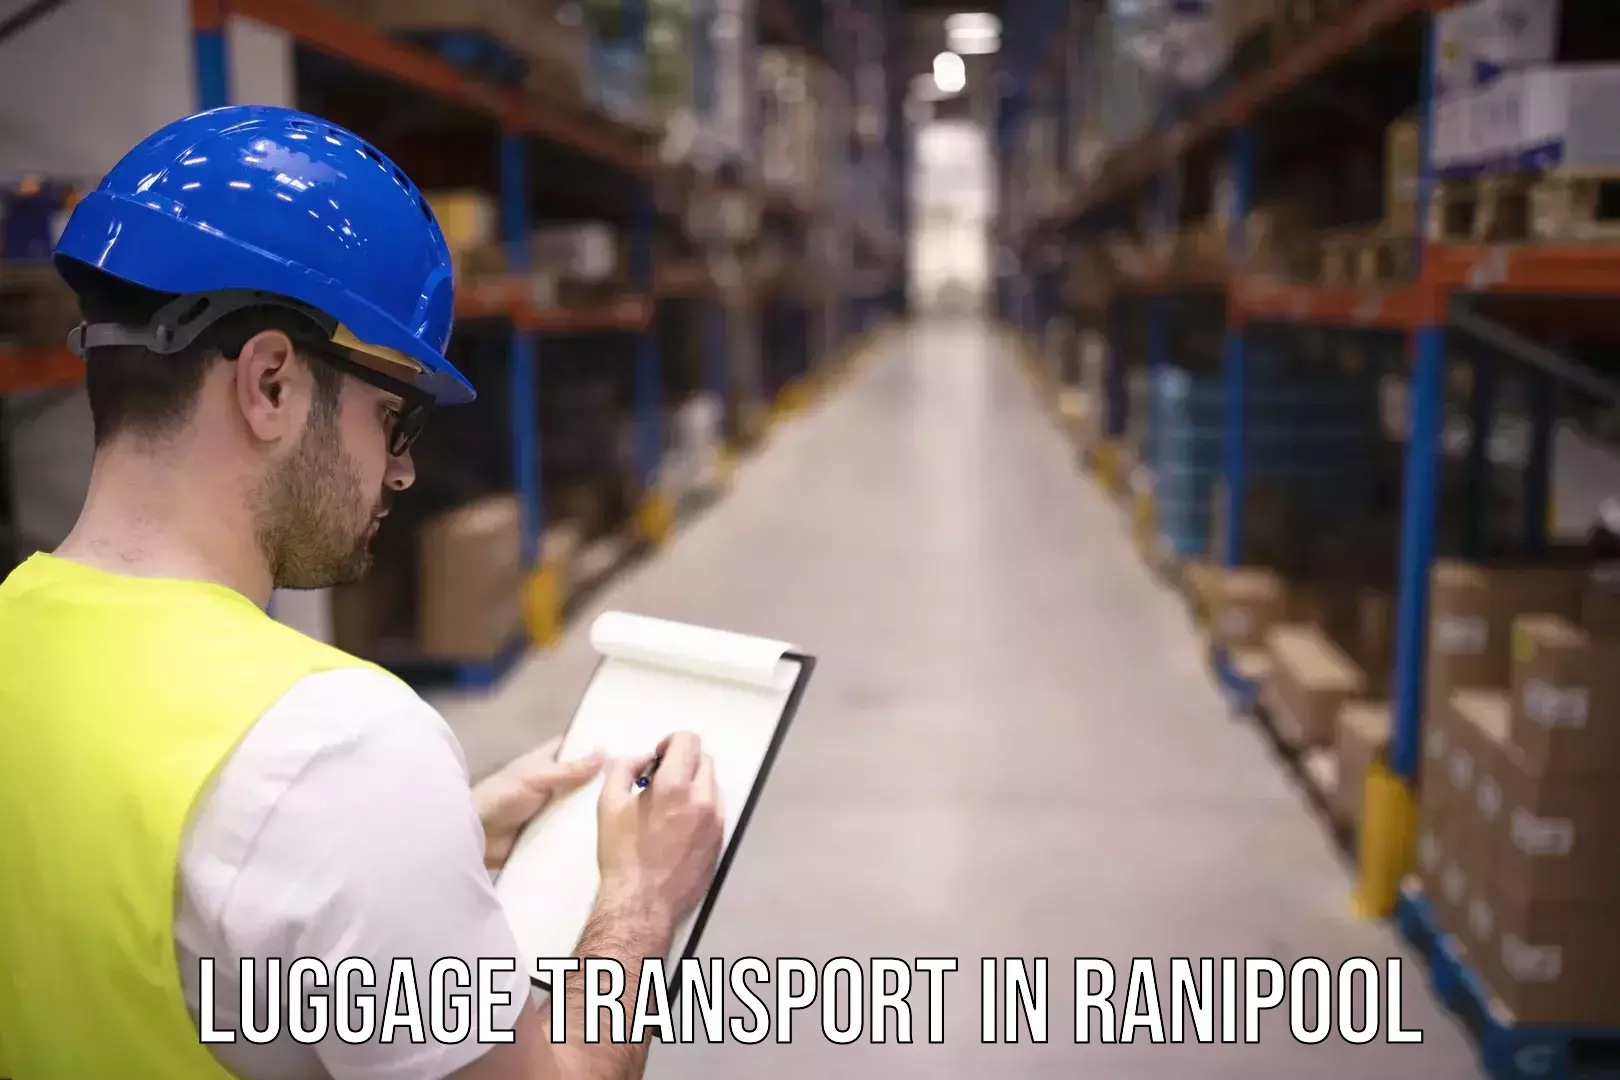 Luggage delivery solutions in Ranipool